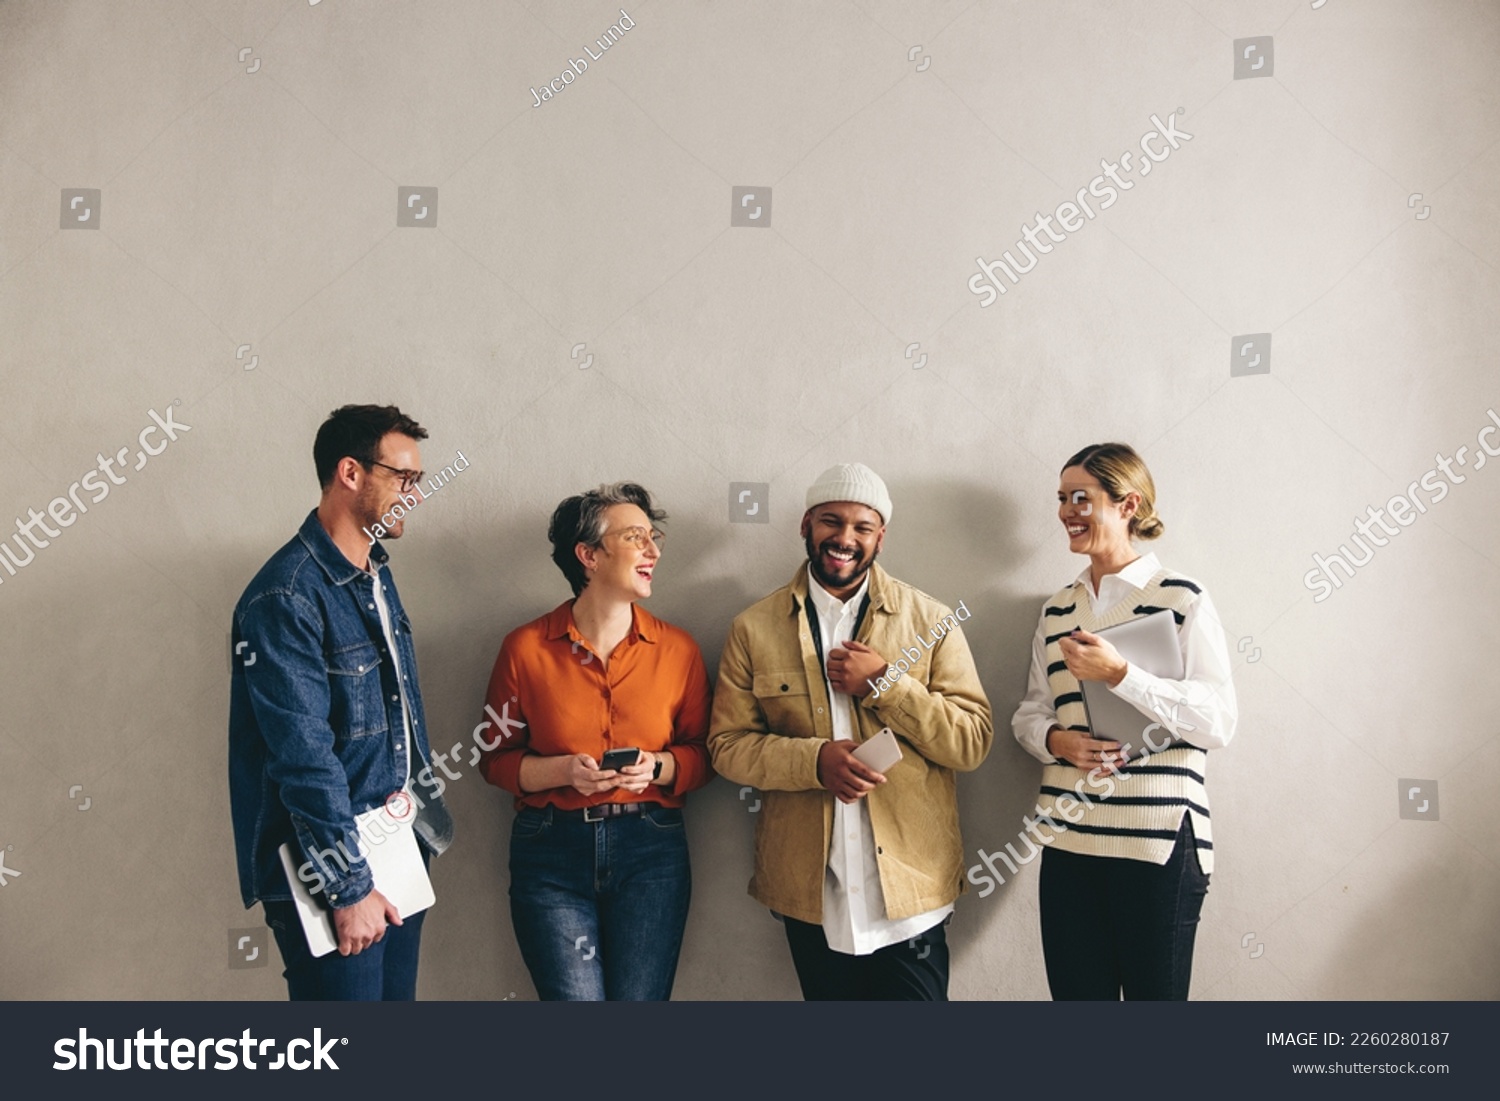 Happy businesspeople smiling cheerfully while waiting in line for an interview. Group of shortlisted job candidates holding different digital devices in a modern workplace. #2260280187